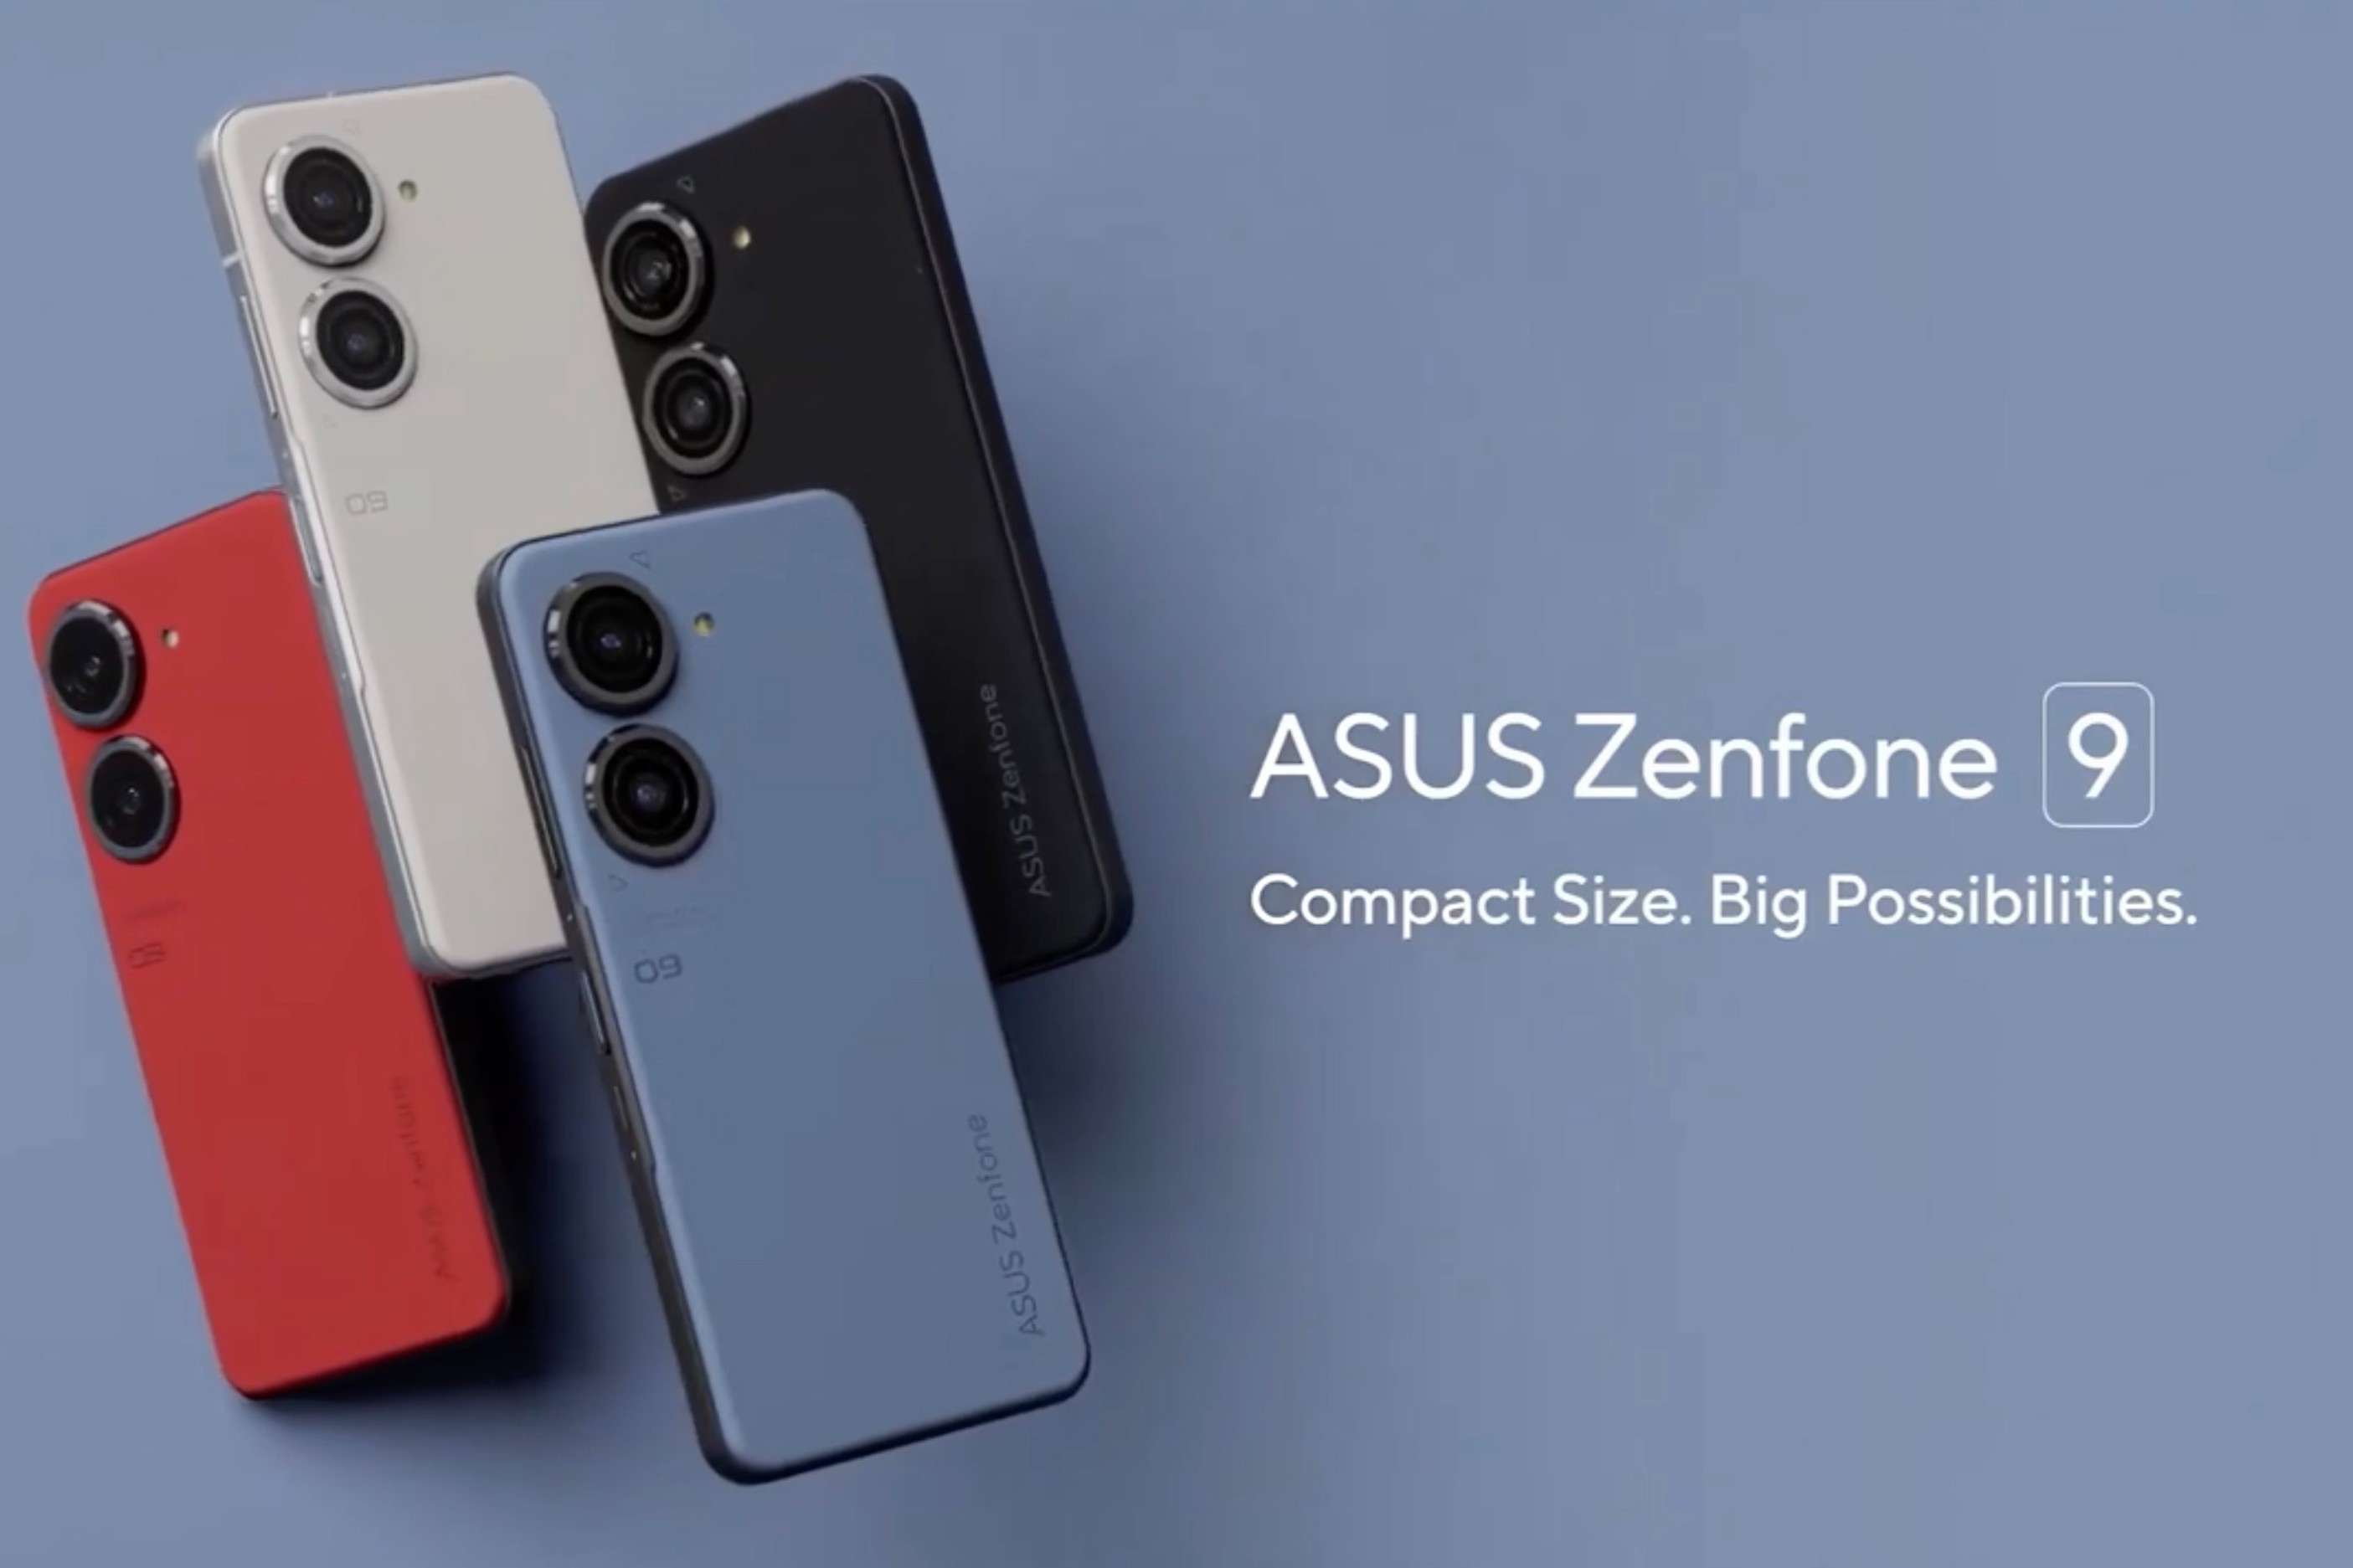 ASUS' Zenfone 10 is yet another compact flagship phone